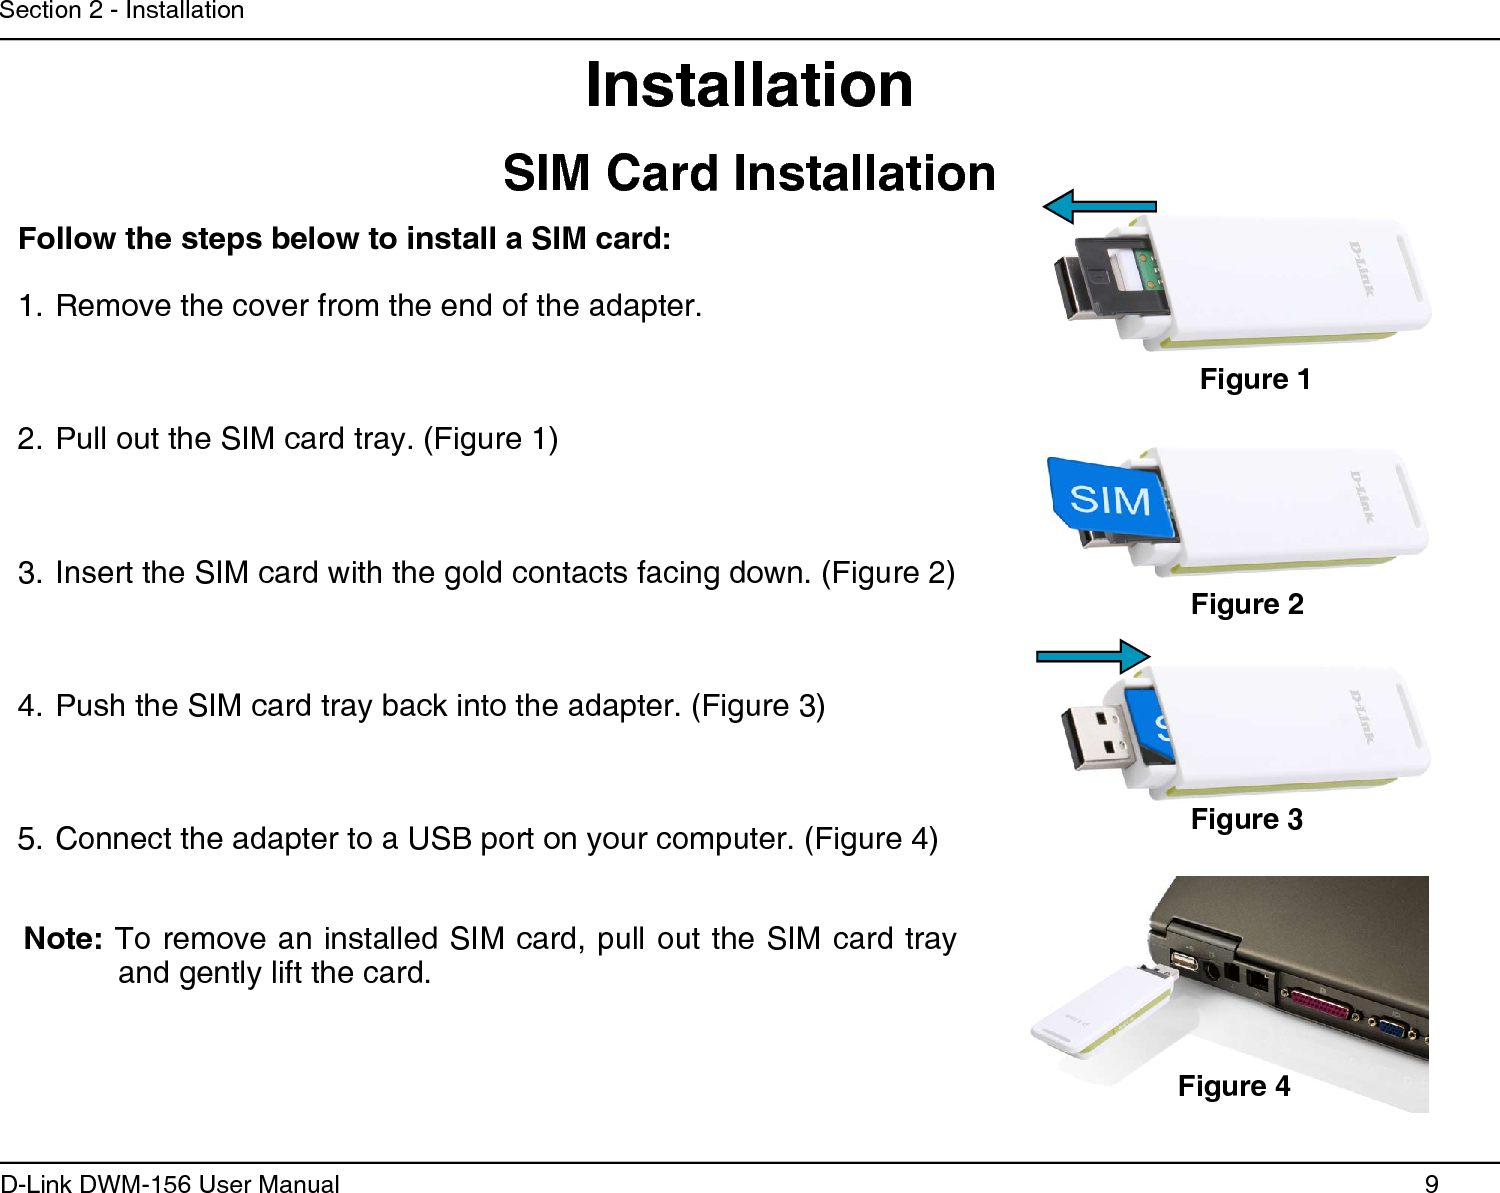 9D-Link DWM-156 User ManualSection 2 - InstallationInstallationFollow the steps below to install a SIM card:Remove the cover from the end of the adapter.1. Pull out the SIM card tray. (Figure 1)2. Insert the SIM card with the gold contacts facing down. (Figure 2)3. Push the SIM card tray back into the adapter. (Figure 3)4. Connect the adapter to a USB port on your computer. (Figure 4)5. Note: To remove an installed SIM card, pull out the SIM card tray and gently lift the card.Figure 1Figure 2Figure 3Figure 4SIM Card Installation 